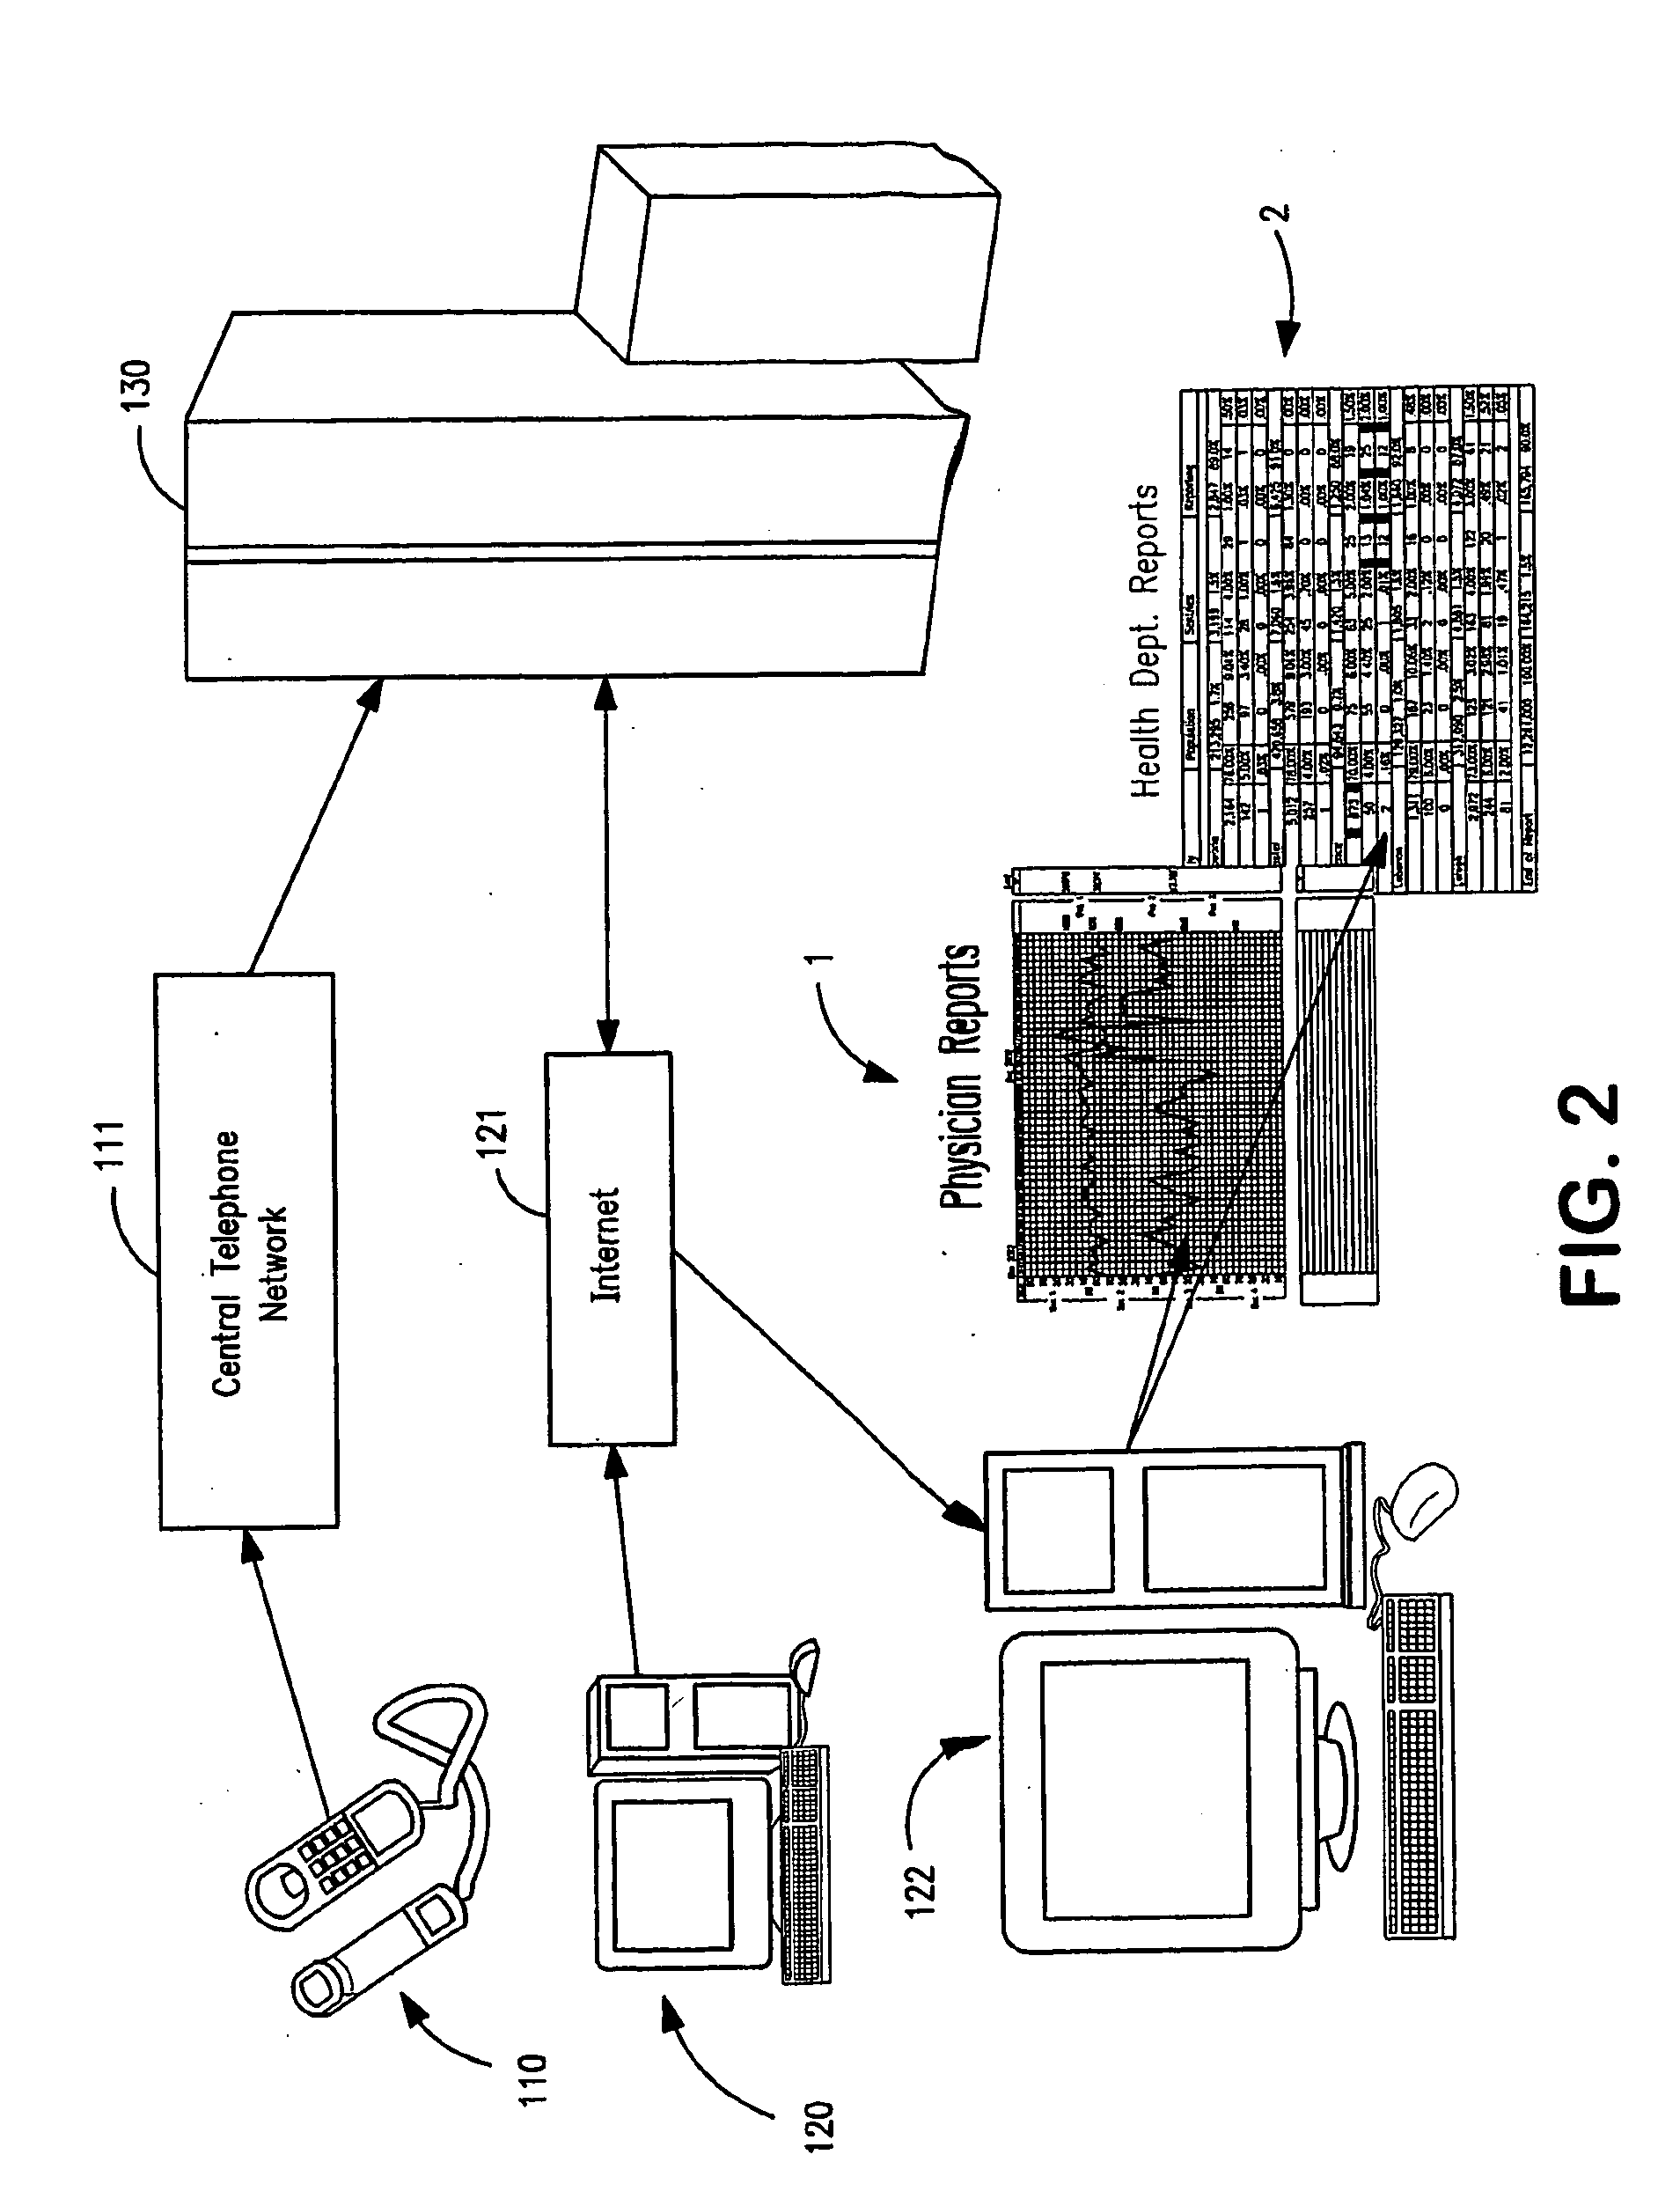 Apparatus and System for Predictive Health Monitoring